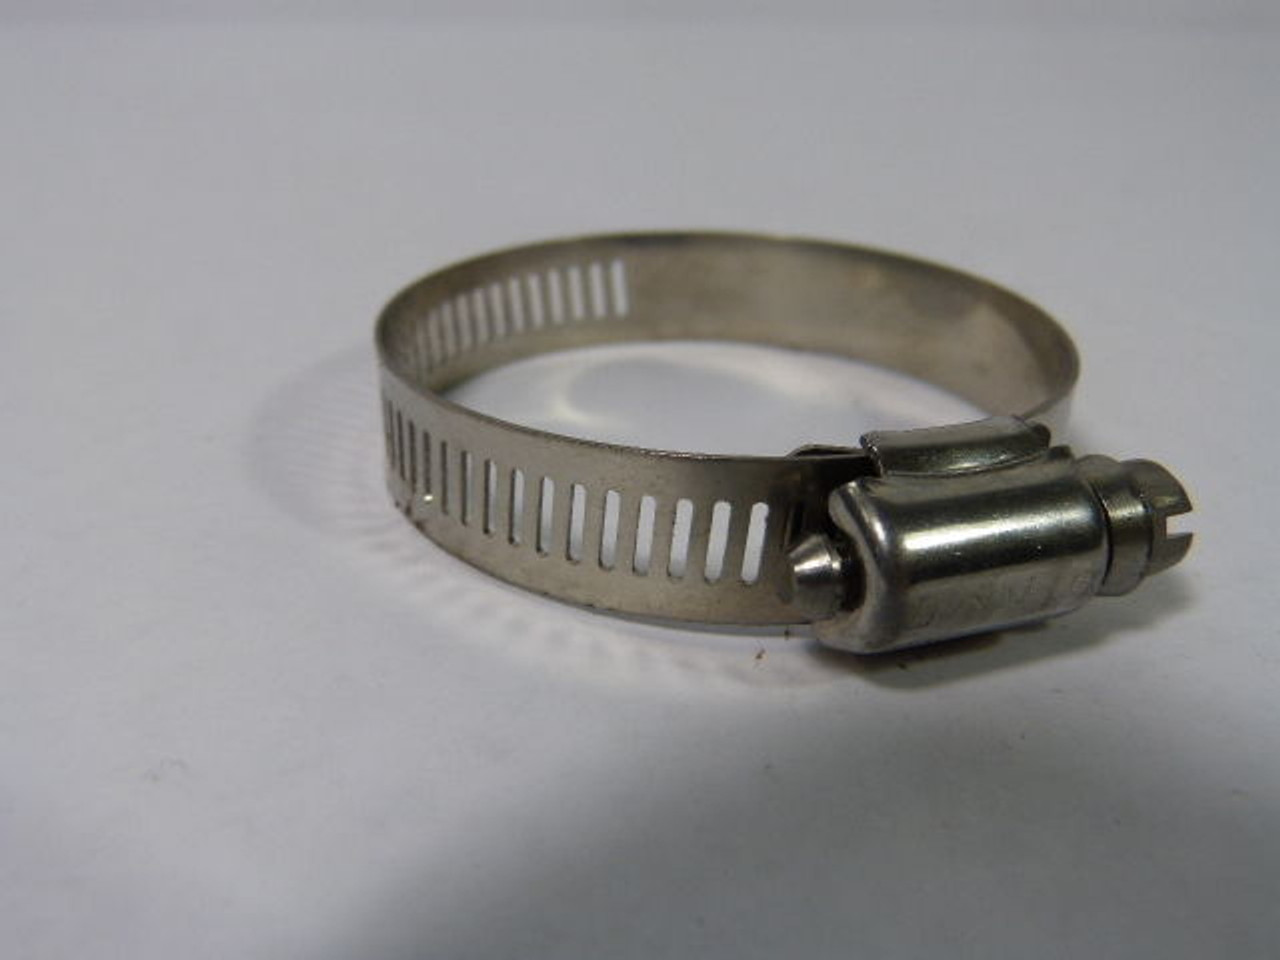 Dynaflo Size 28 Stainless Steel Worm Drive Clamp 32-57mm ! NEW !